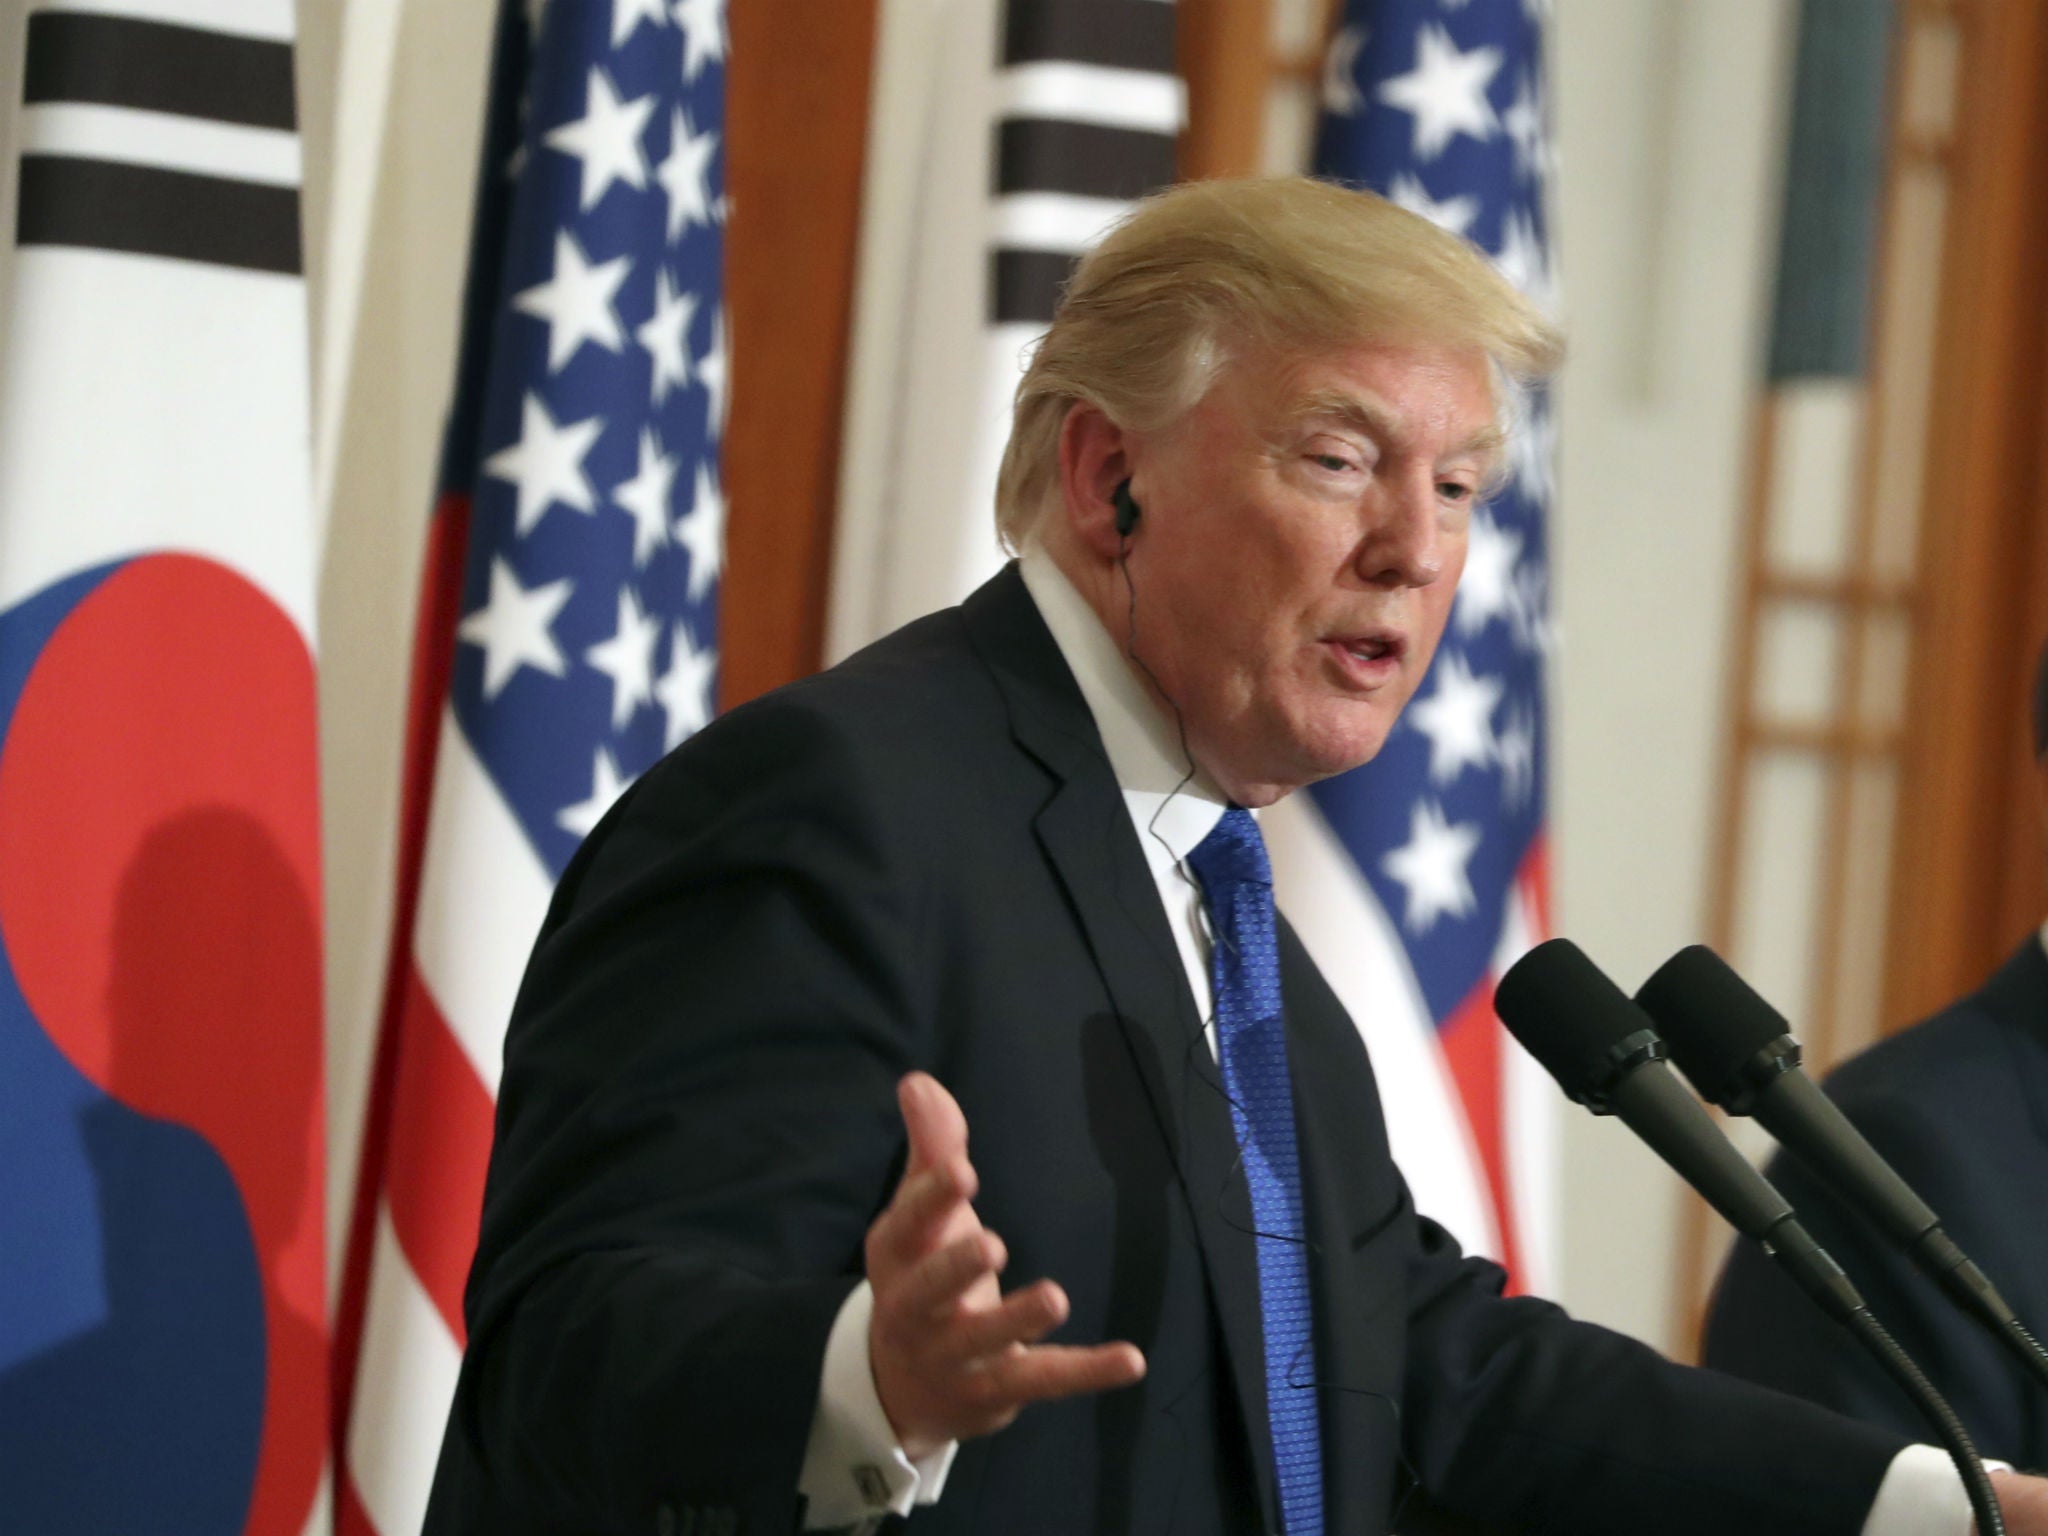 Donald Trump told reporters in Seoul, South Korea on Tuesday, Nov. 7, 2017 that new gun laws would not have prevented another shooting